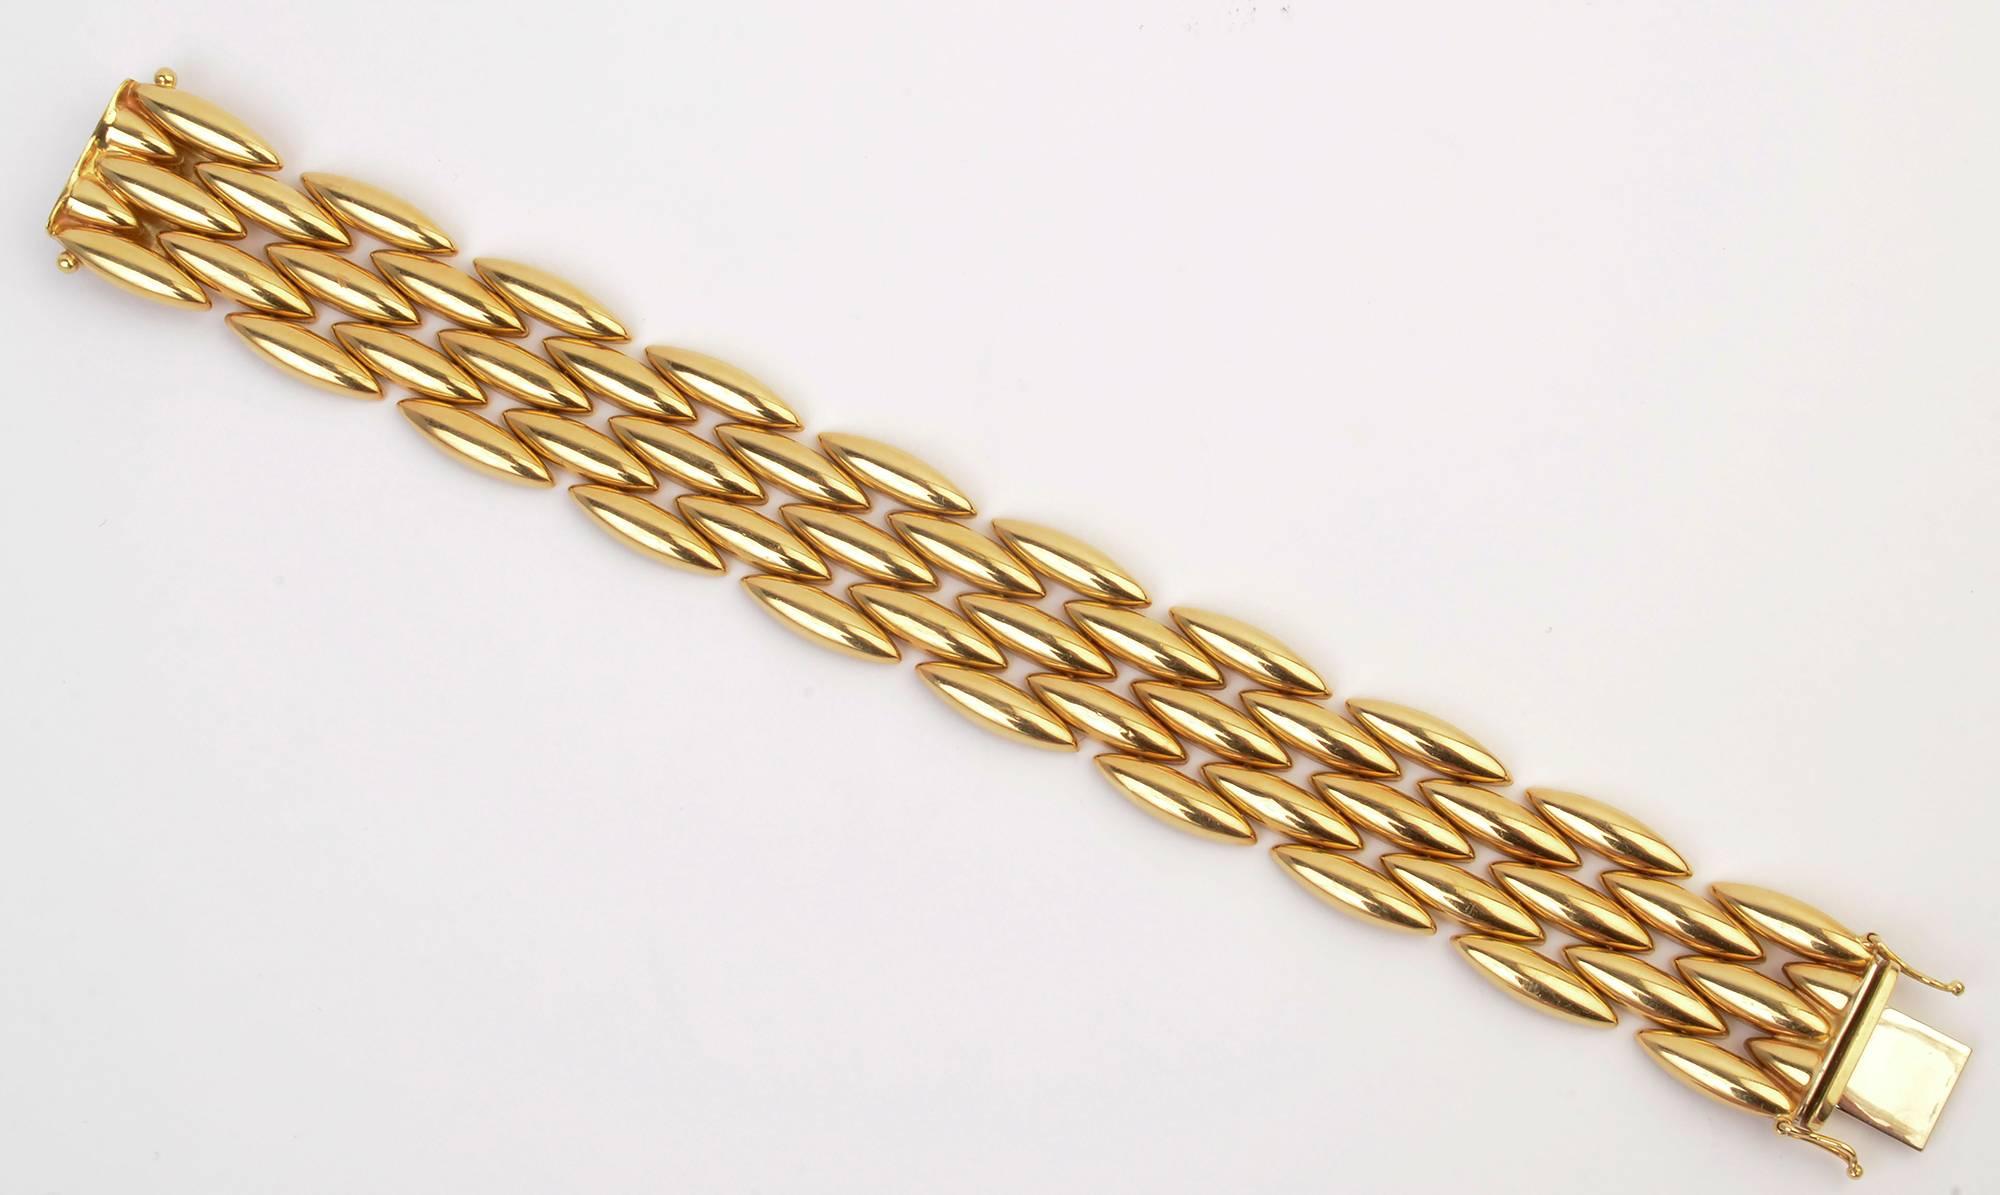 Classic eighteen karat gold bracelet by Cartier with five rows of navette shaped links. The matching necklace is offered as item LU1333250523. Both are an especially rich shade of gold. The bracelet is 3/4" wide and 7 5/16" long.